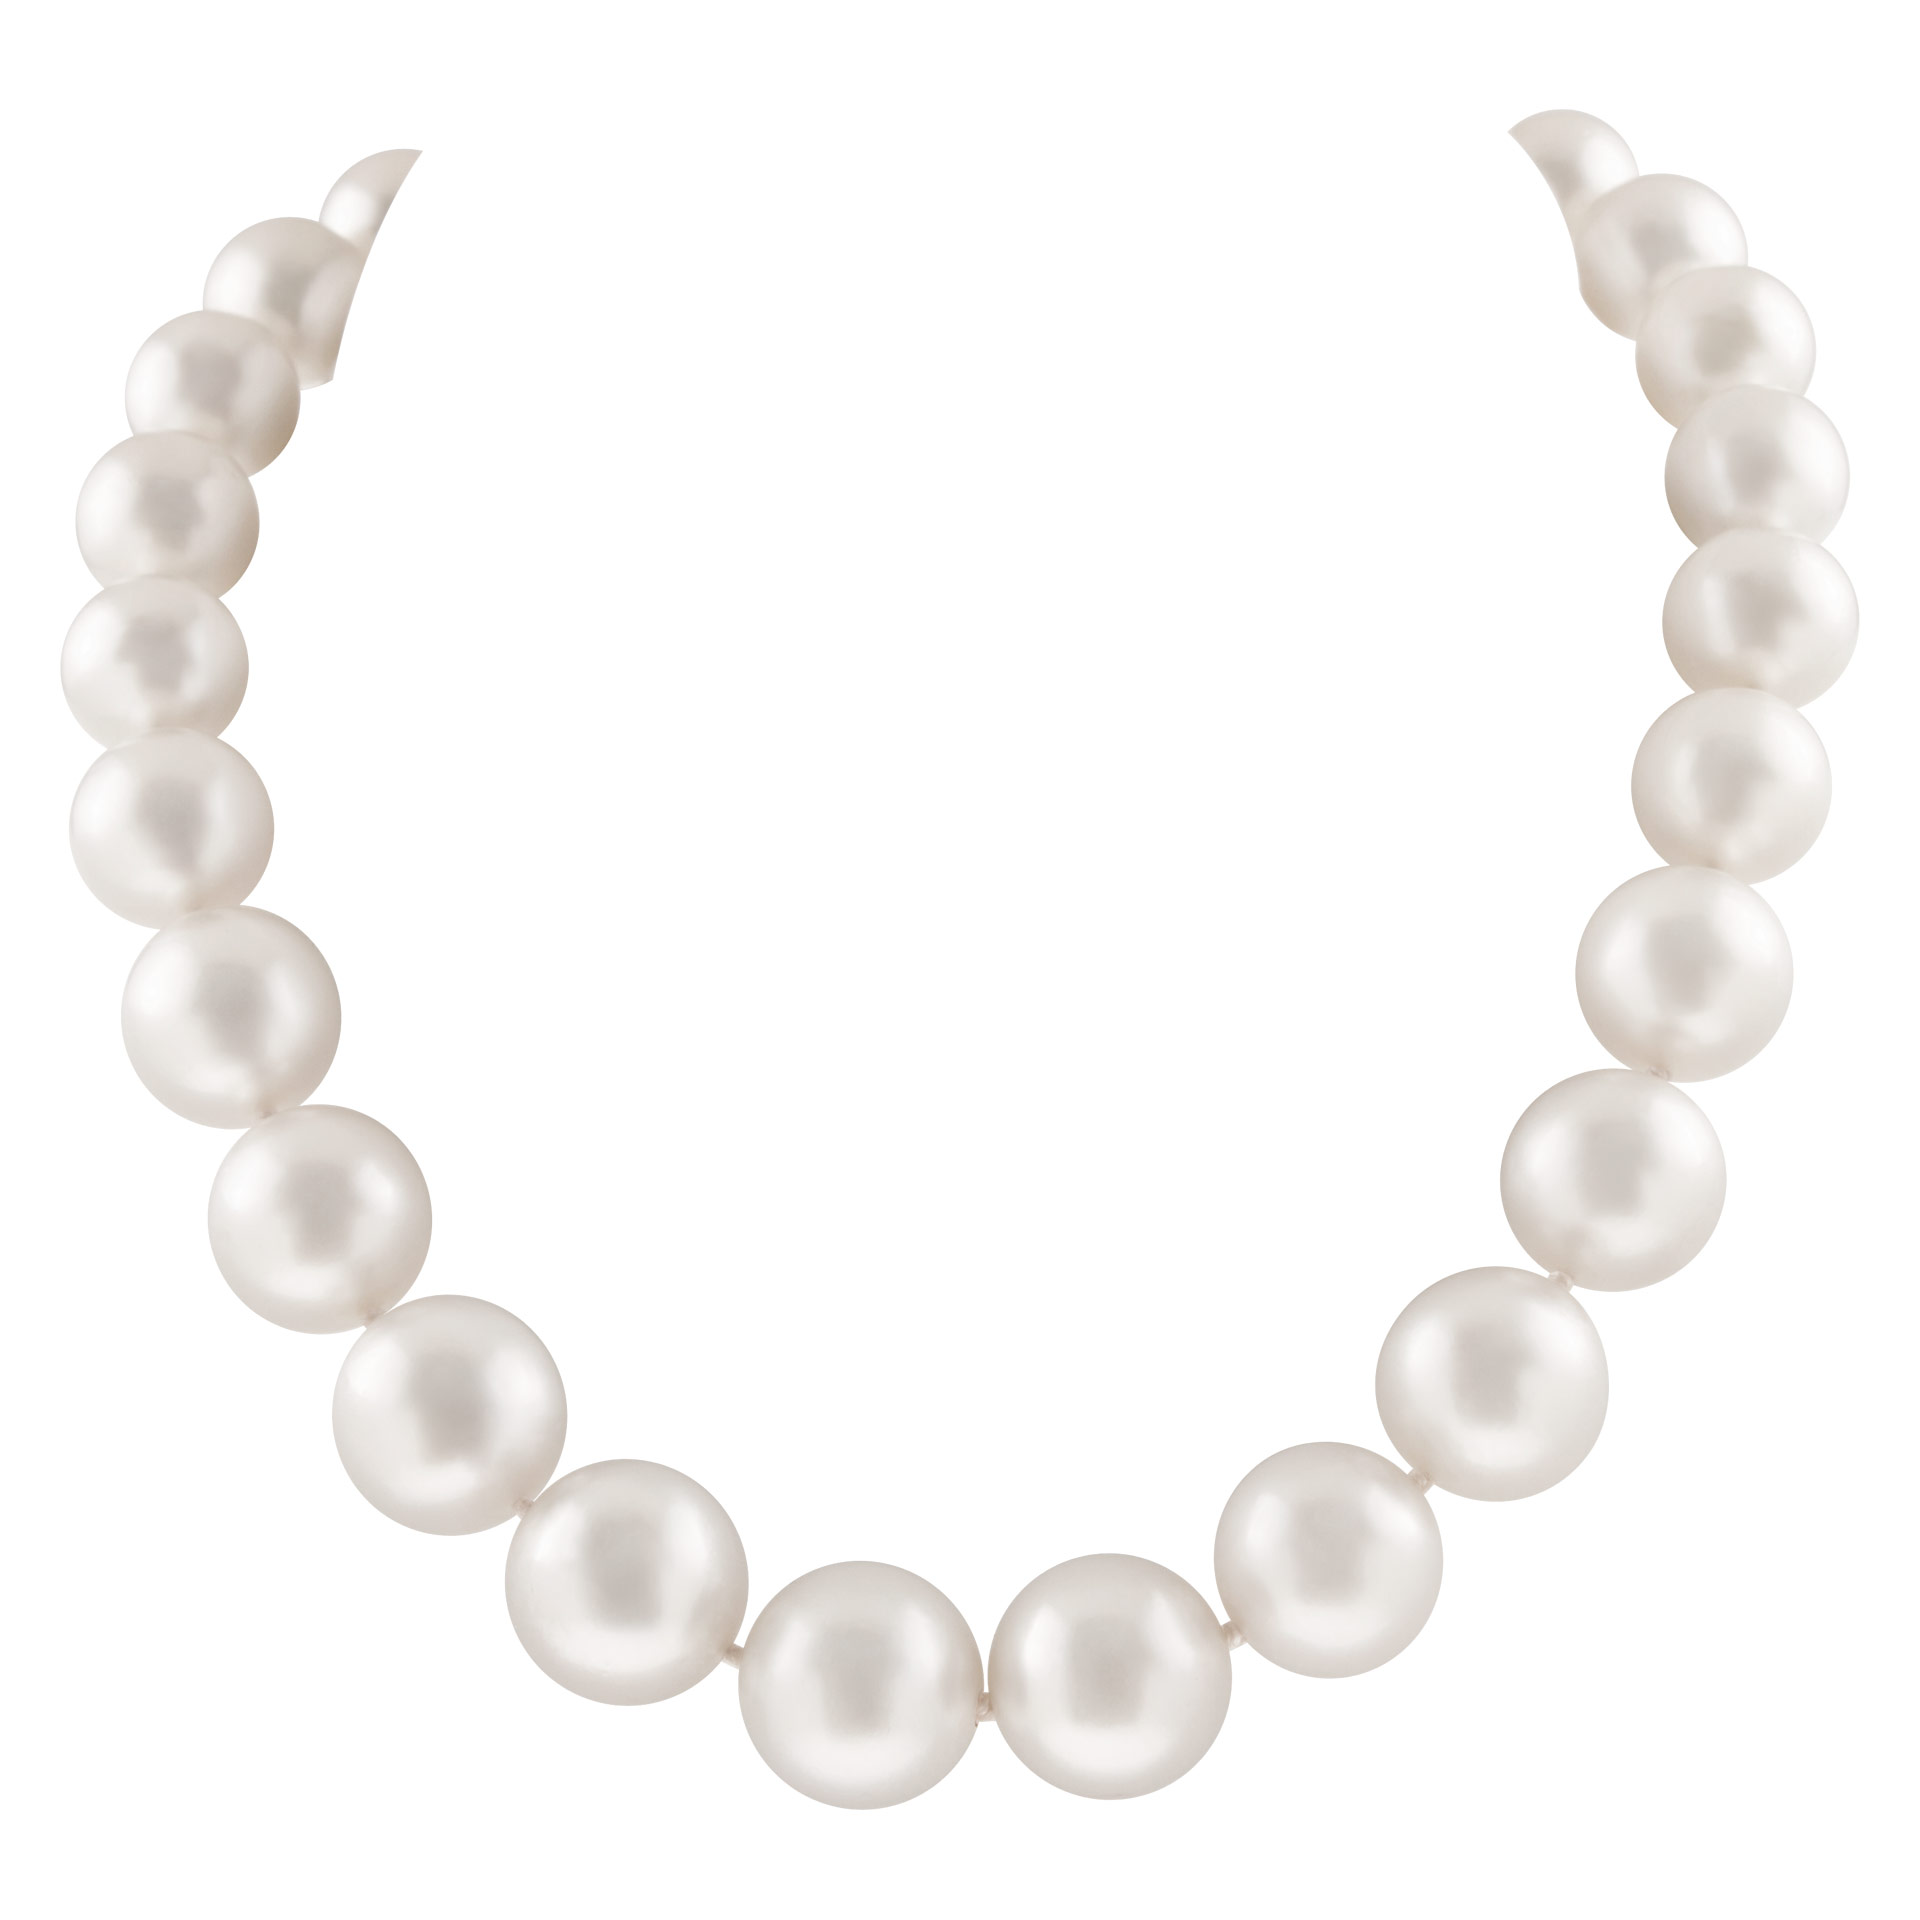 Pearl necklace image 1